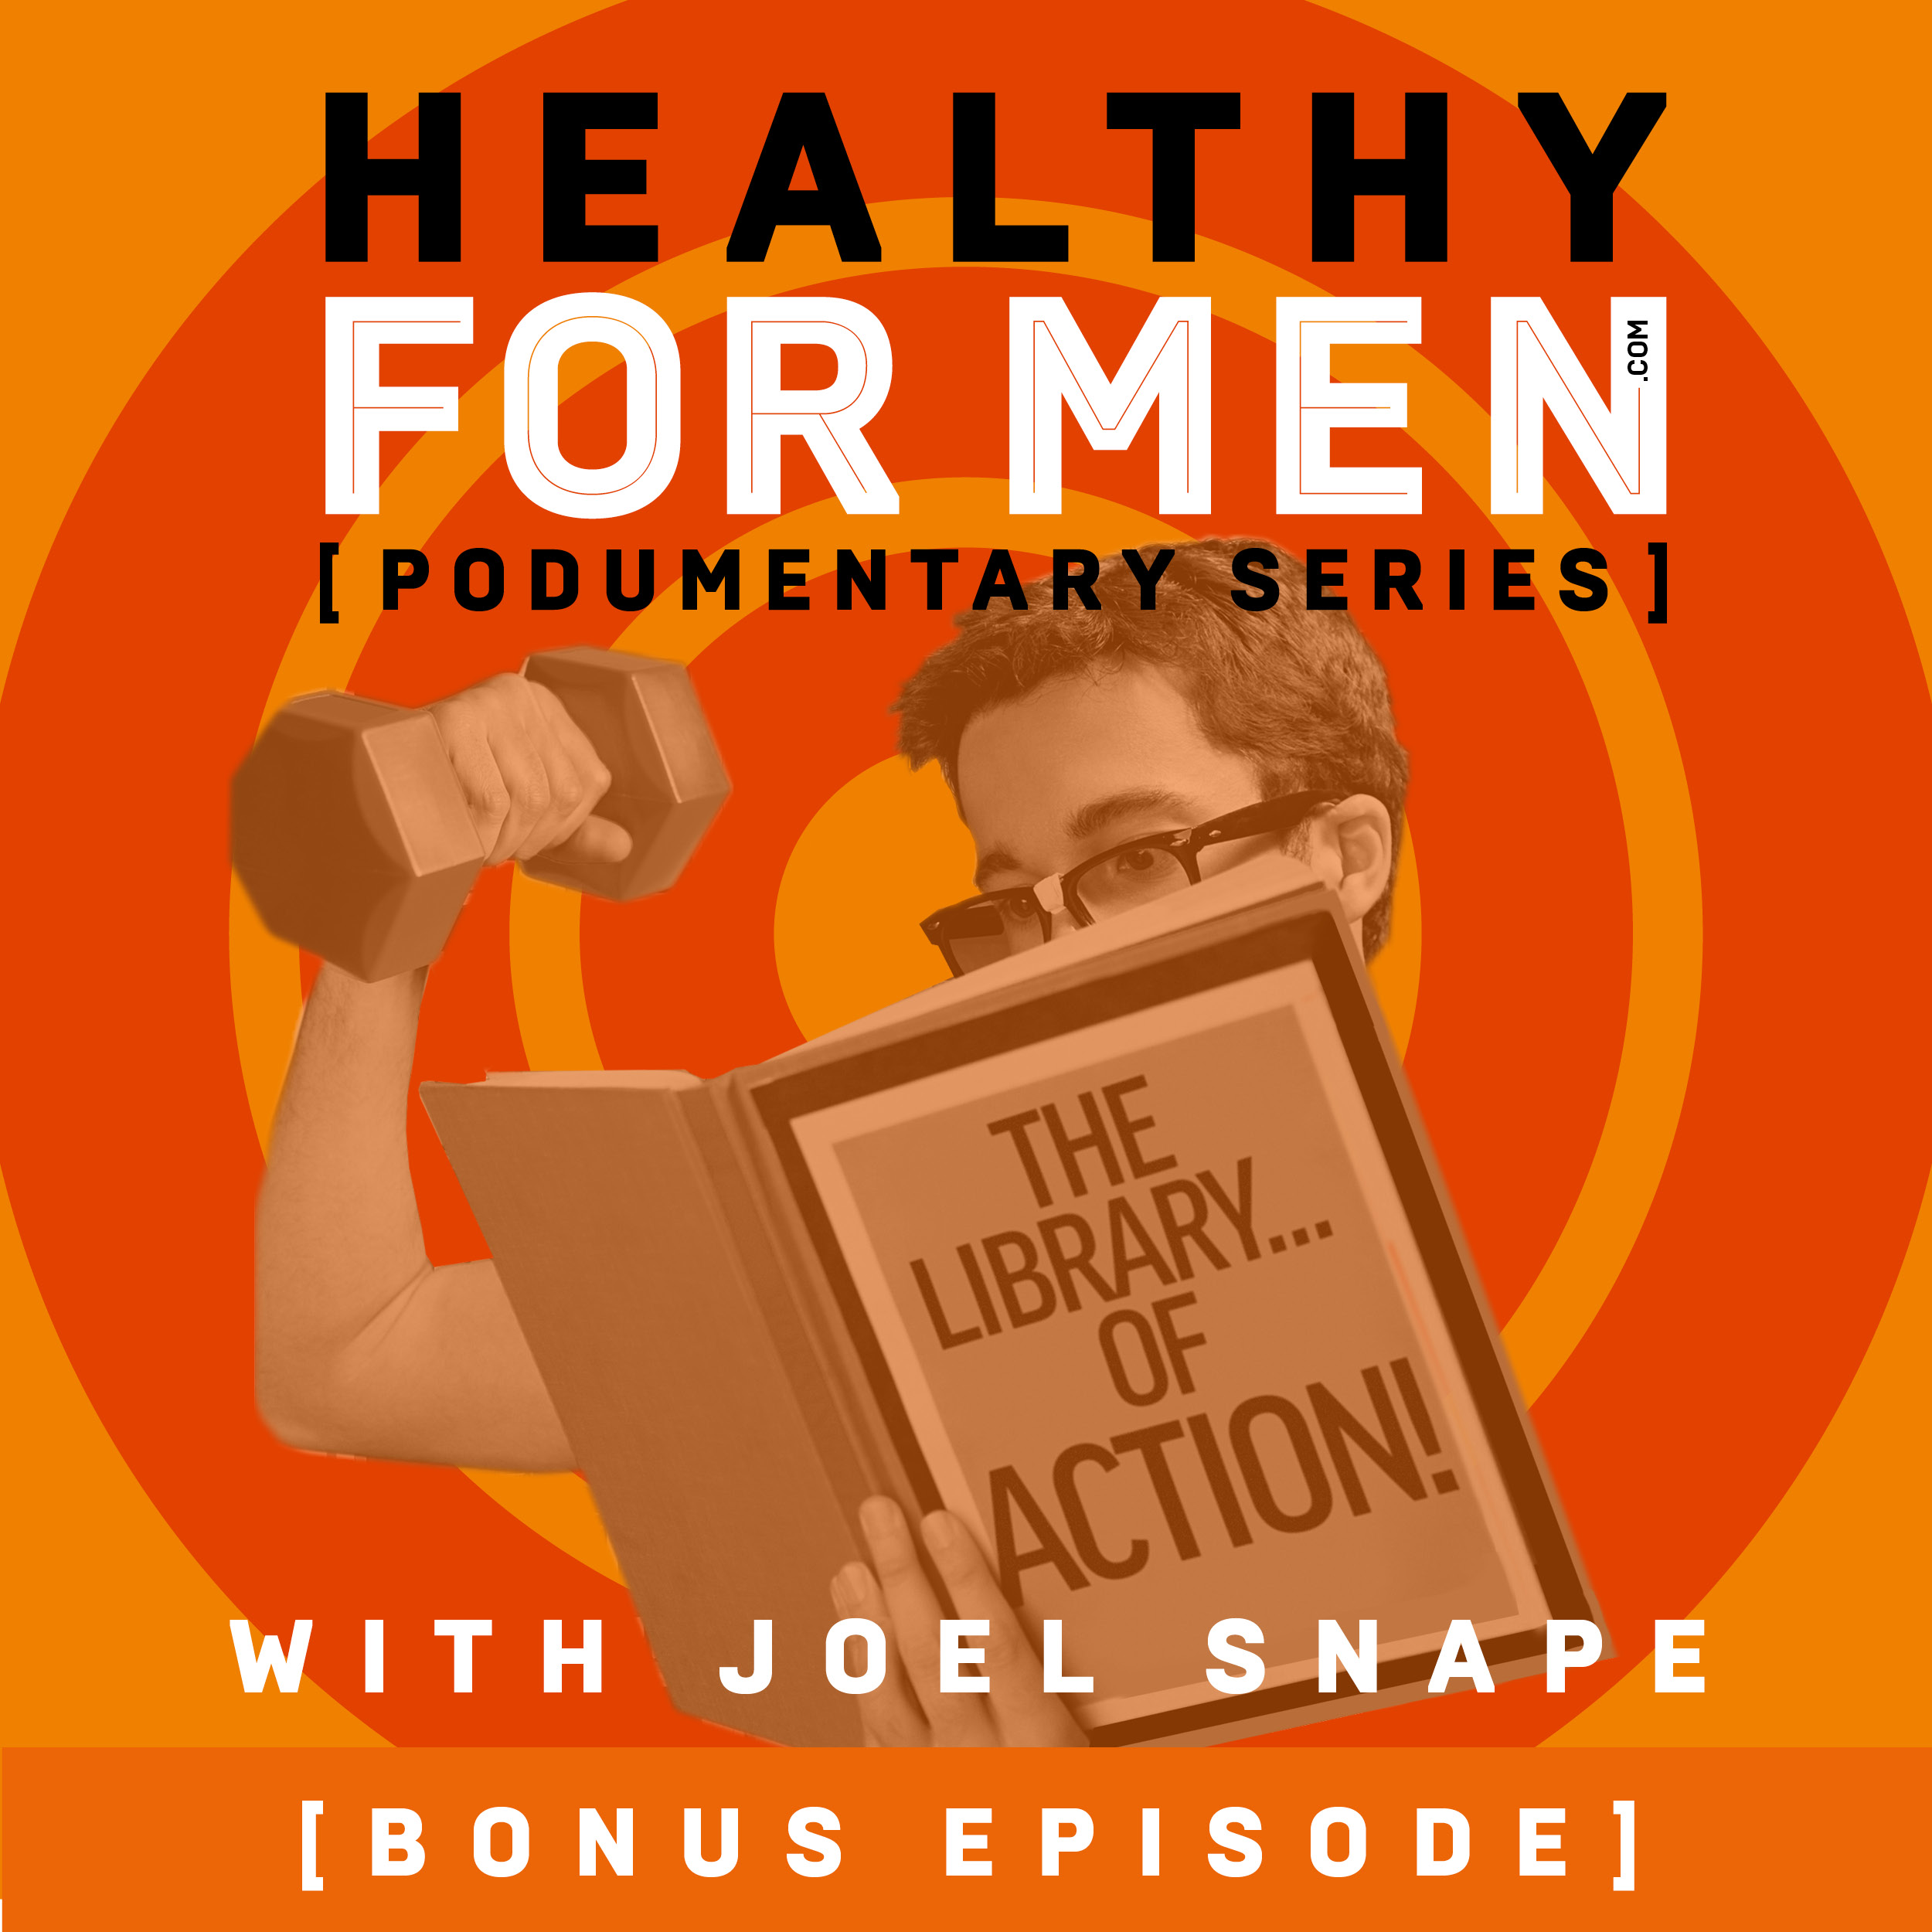 Healthy For Men's Top 5 Health &amp; Fitness Books